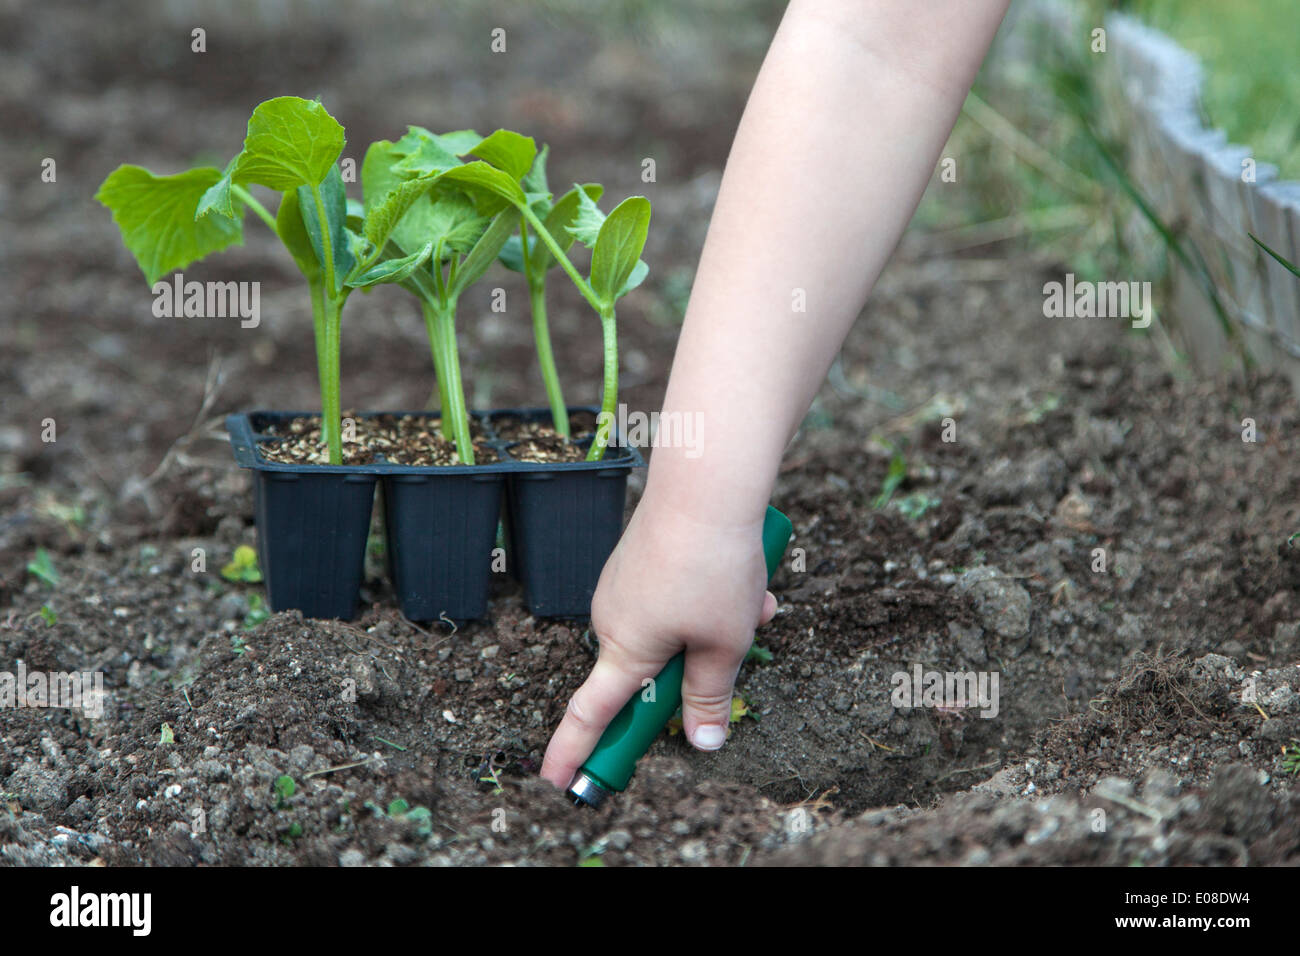 A kids hand gardening in a vegetable patch Stock Photo